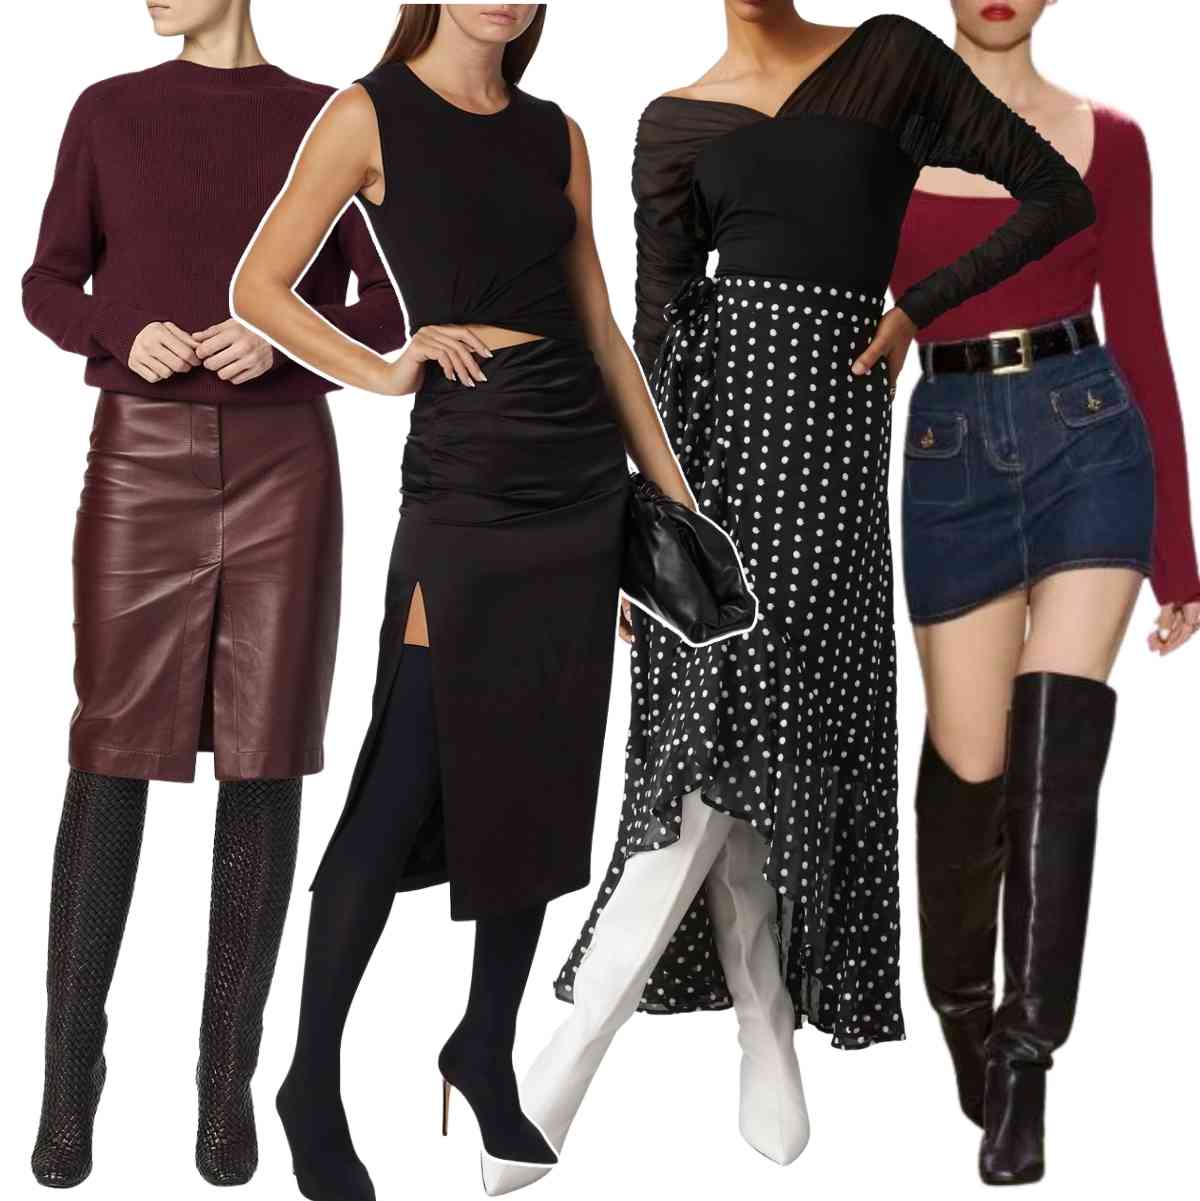 Collage of 4 women wearing different thigh high boots with skirts outfits.